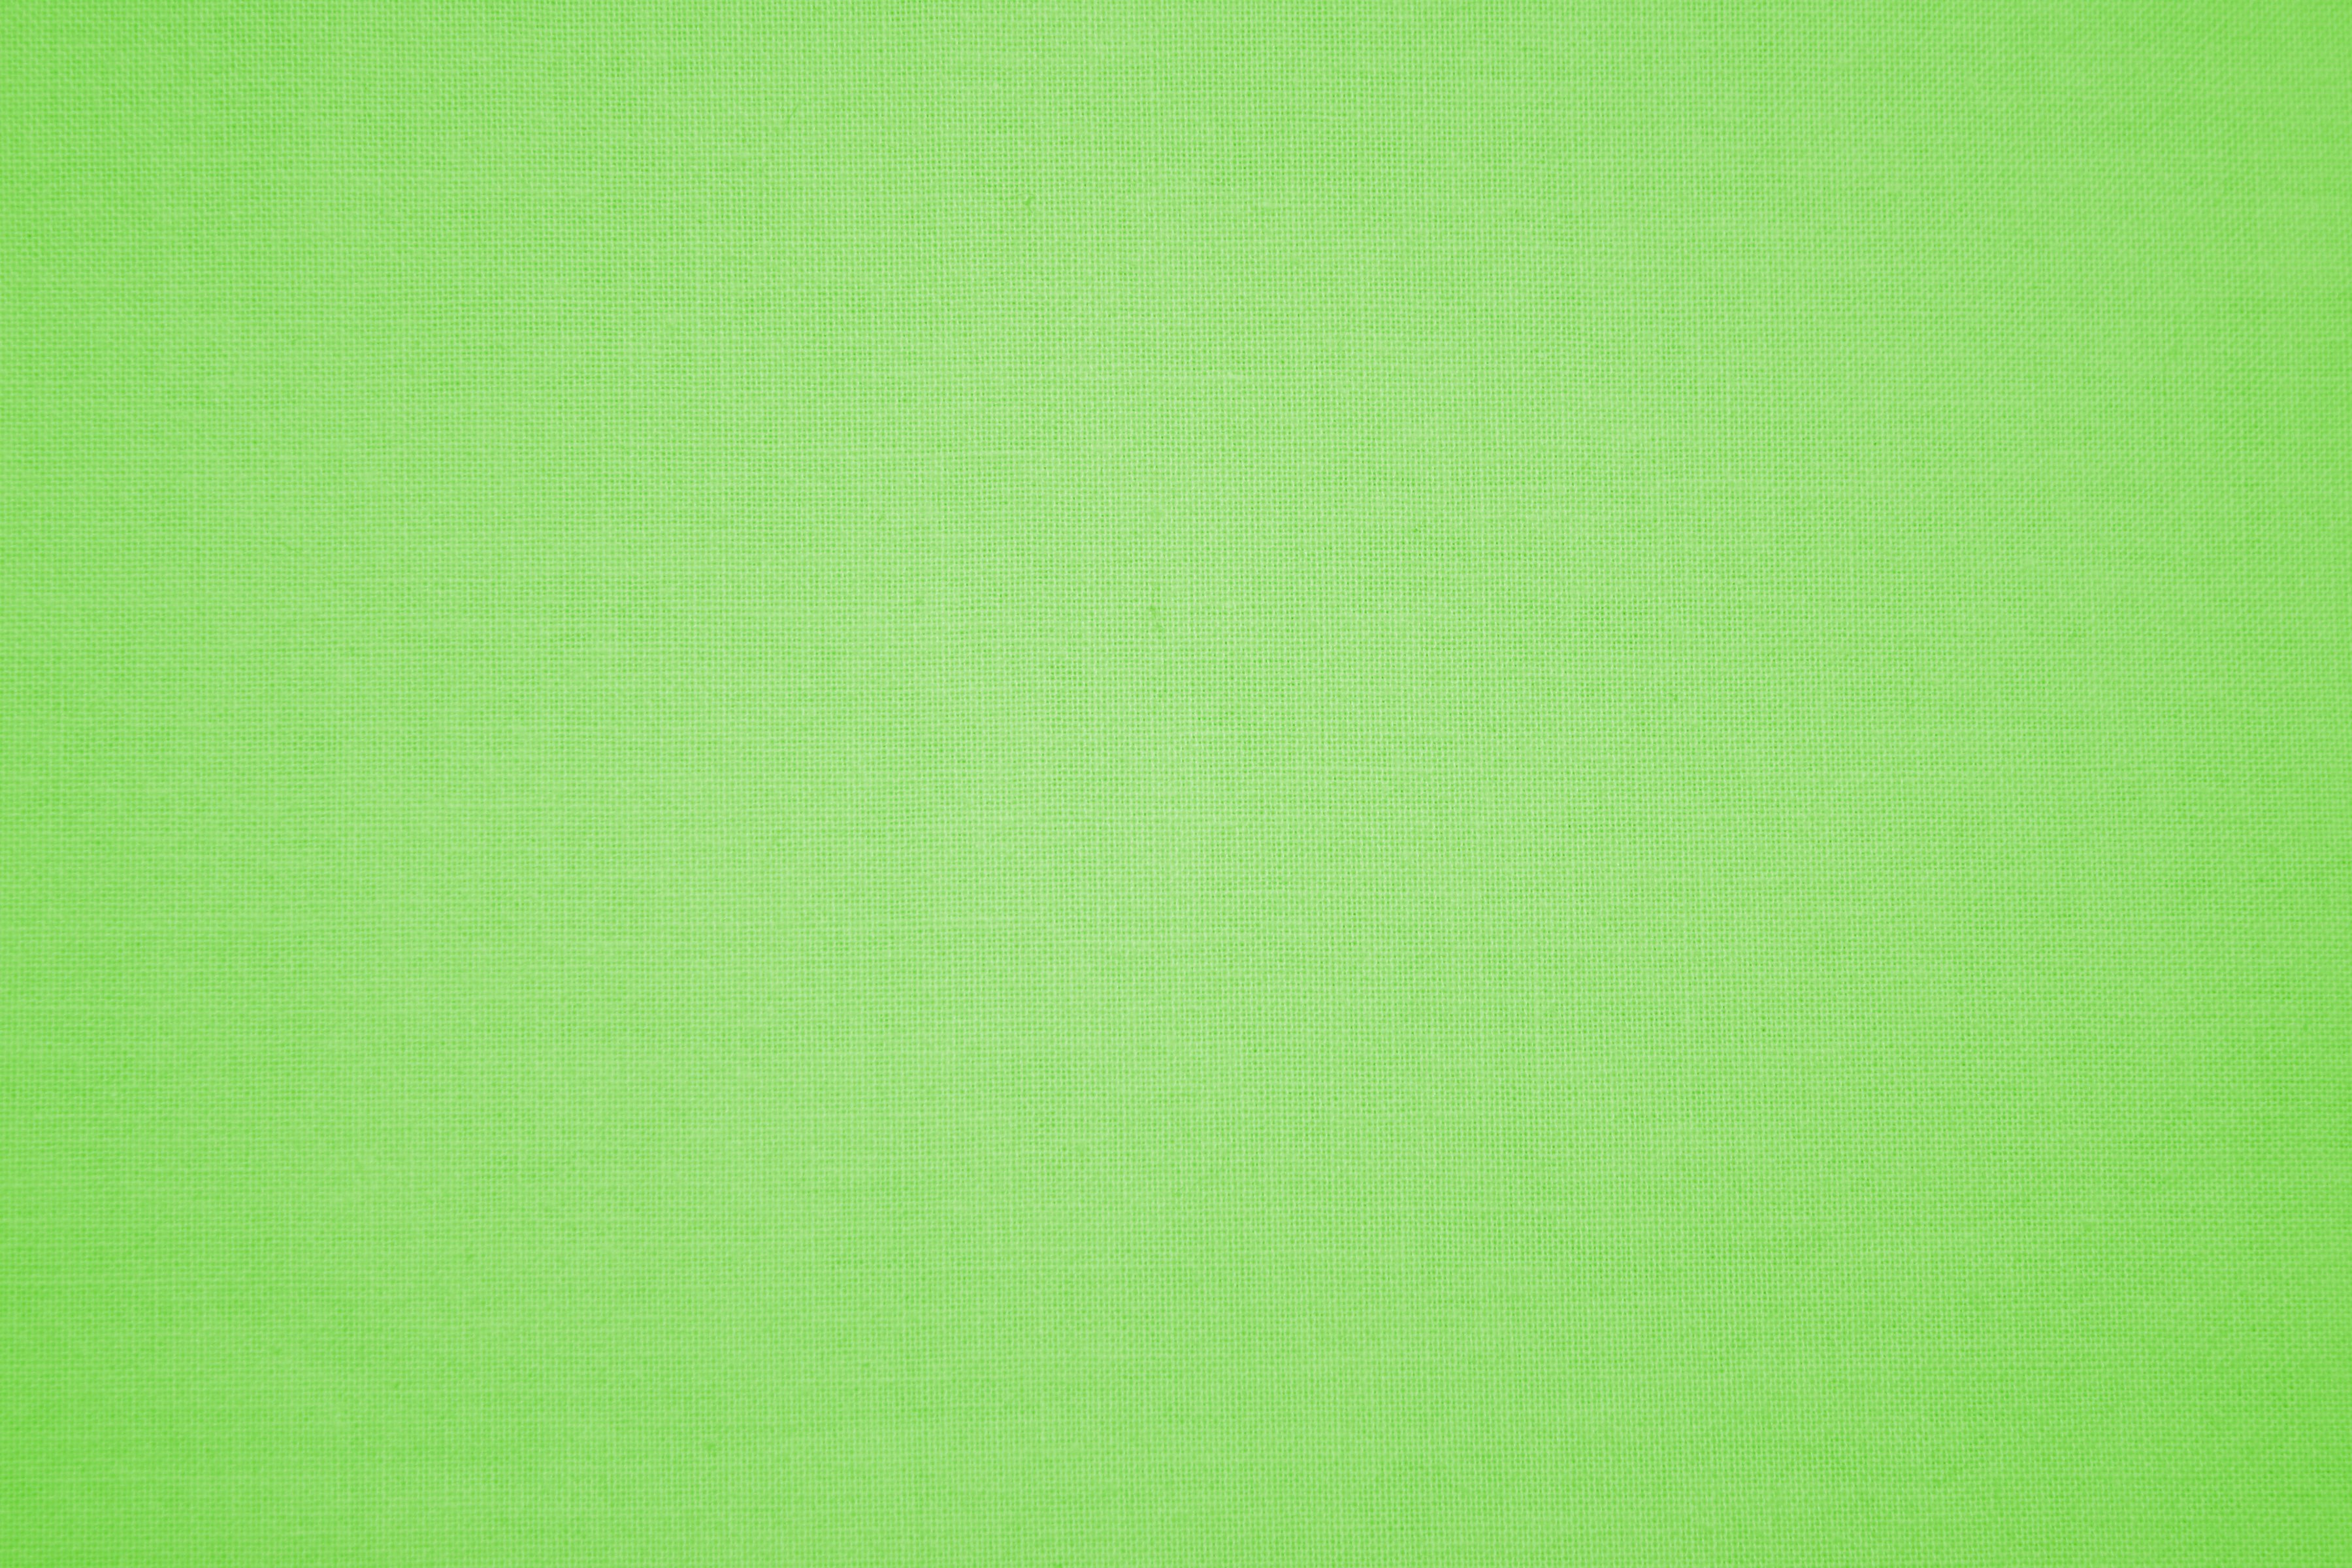 Lime Green Background Images amp Pictures   Becuo